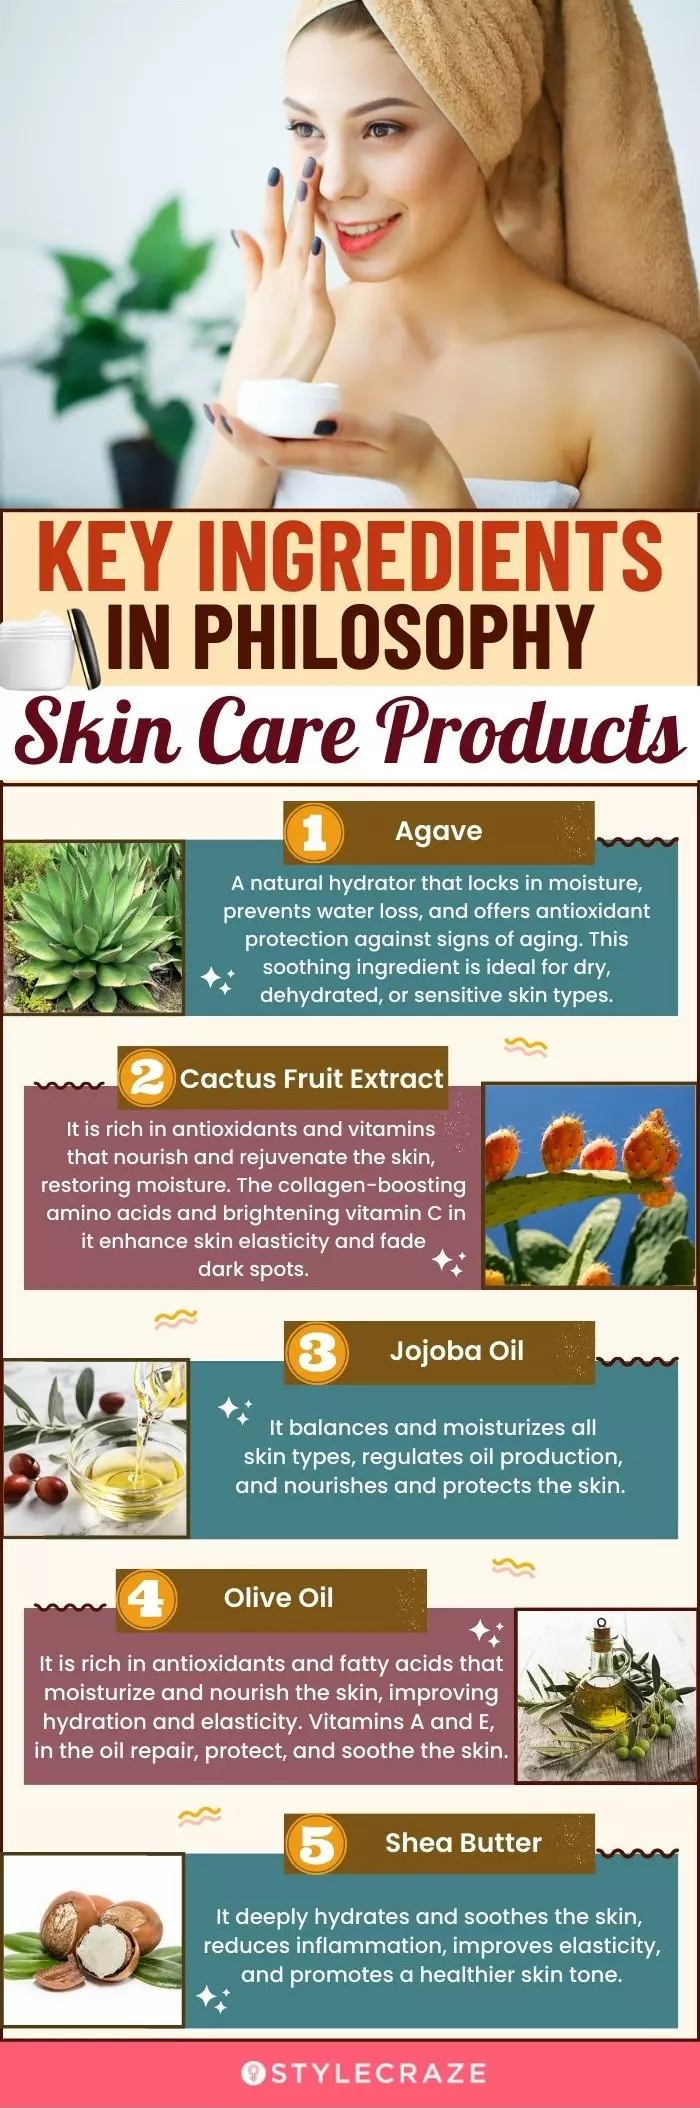 Key Ingredients In Philosophy Skin Care Products (infographic)